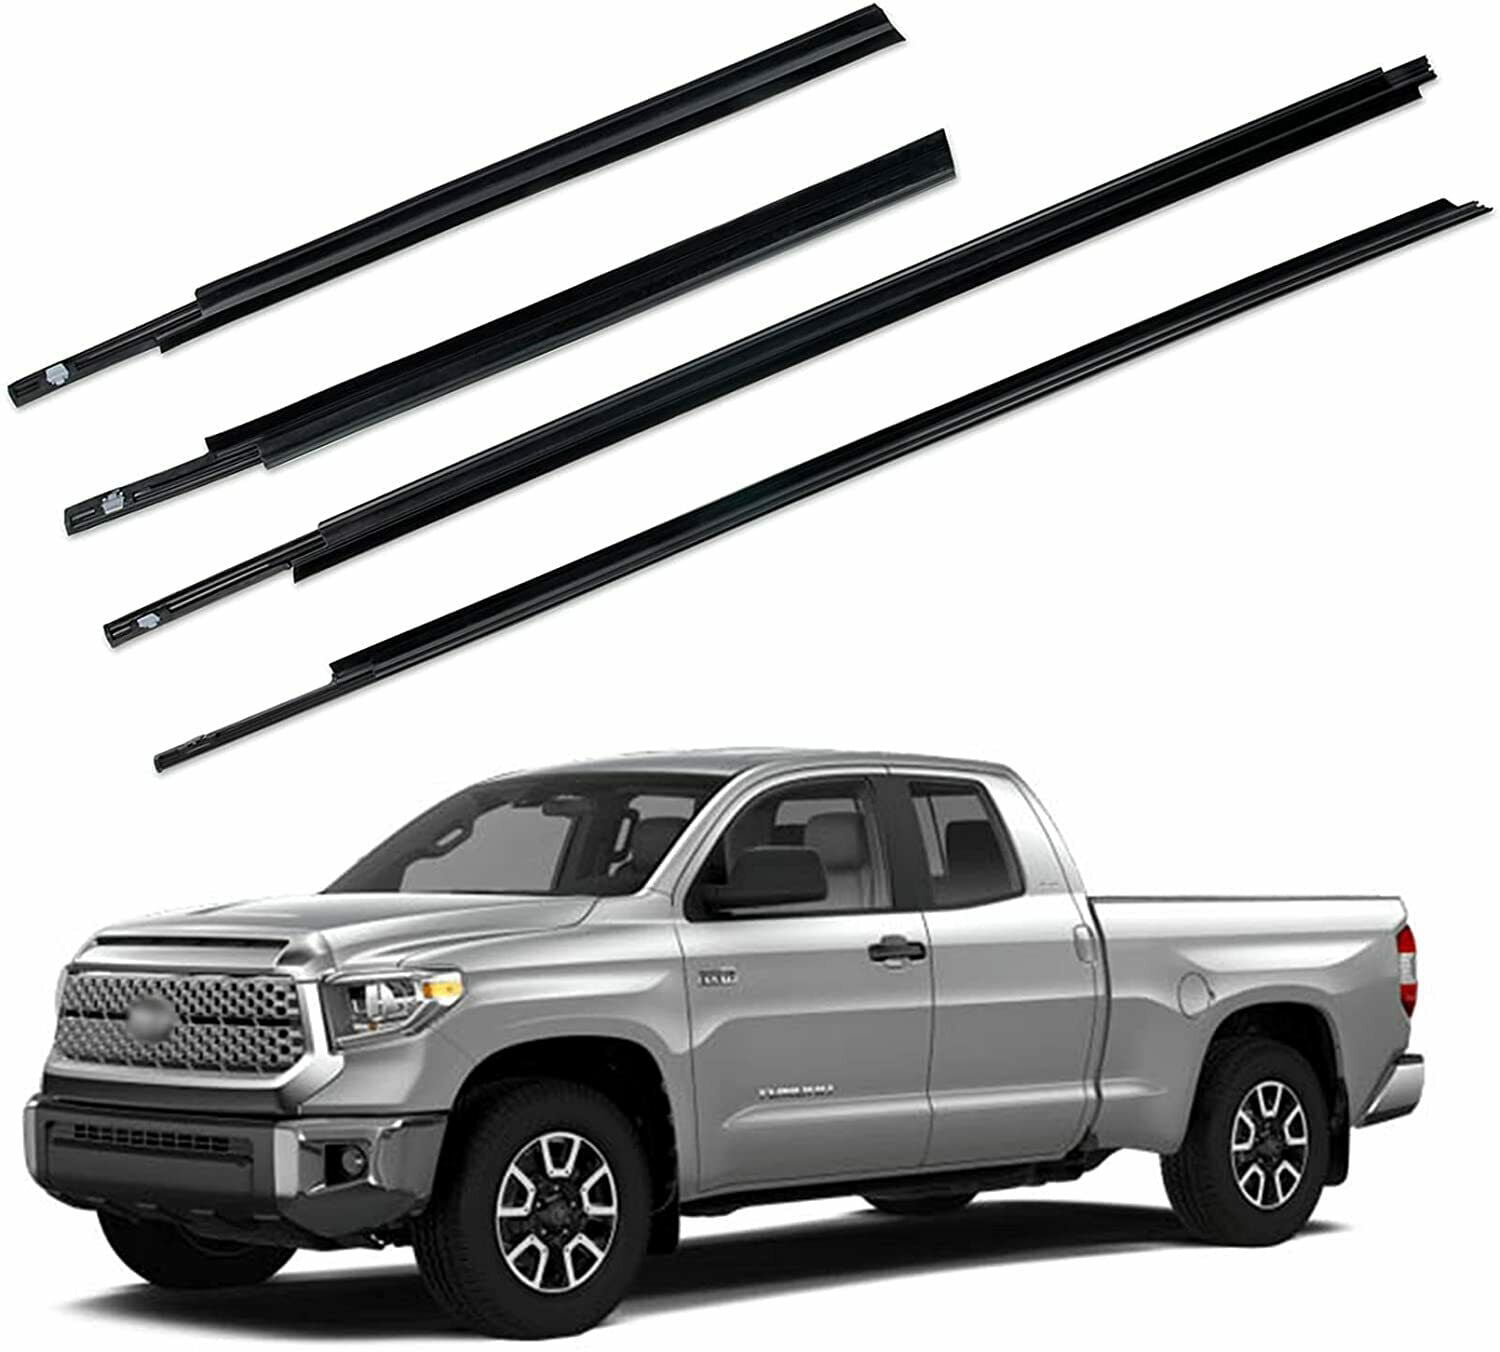 4pcs Window Exterior Seal Belt Weatherstrip Car Kit Compatible with Toyota Tundra Double Cab 2007-2020 Replaces 68160-0C020 68164-0C010